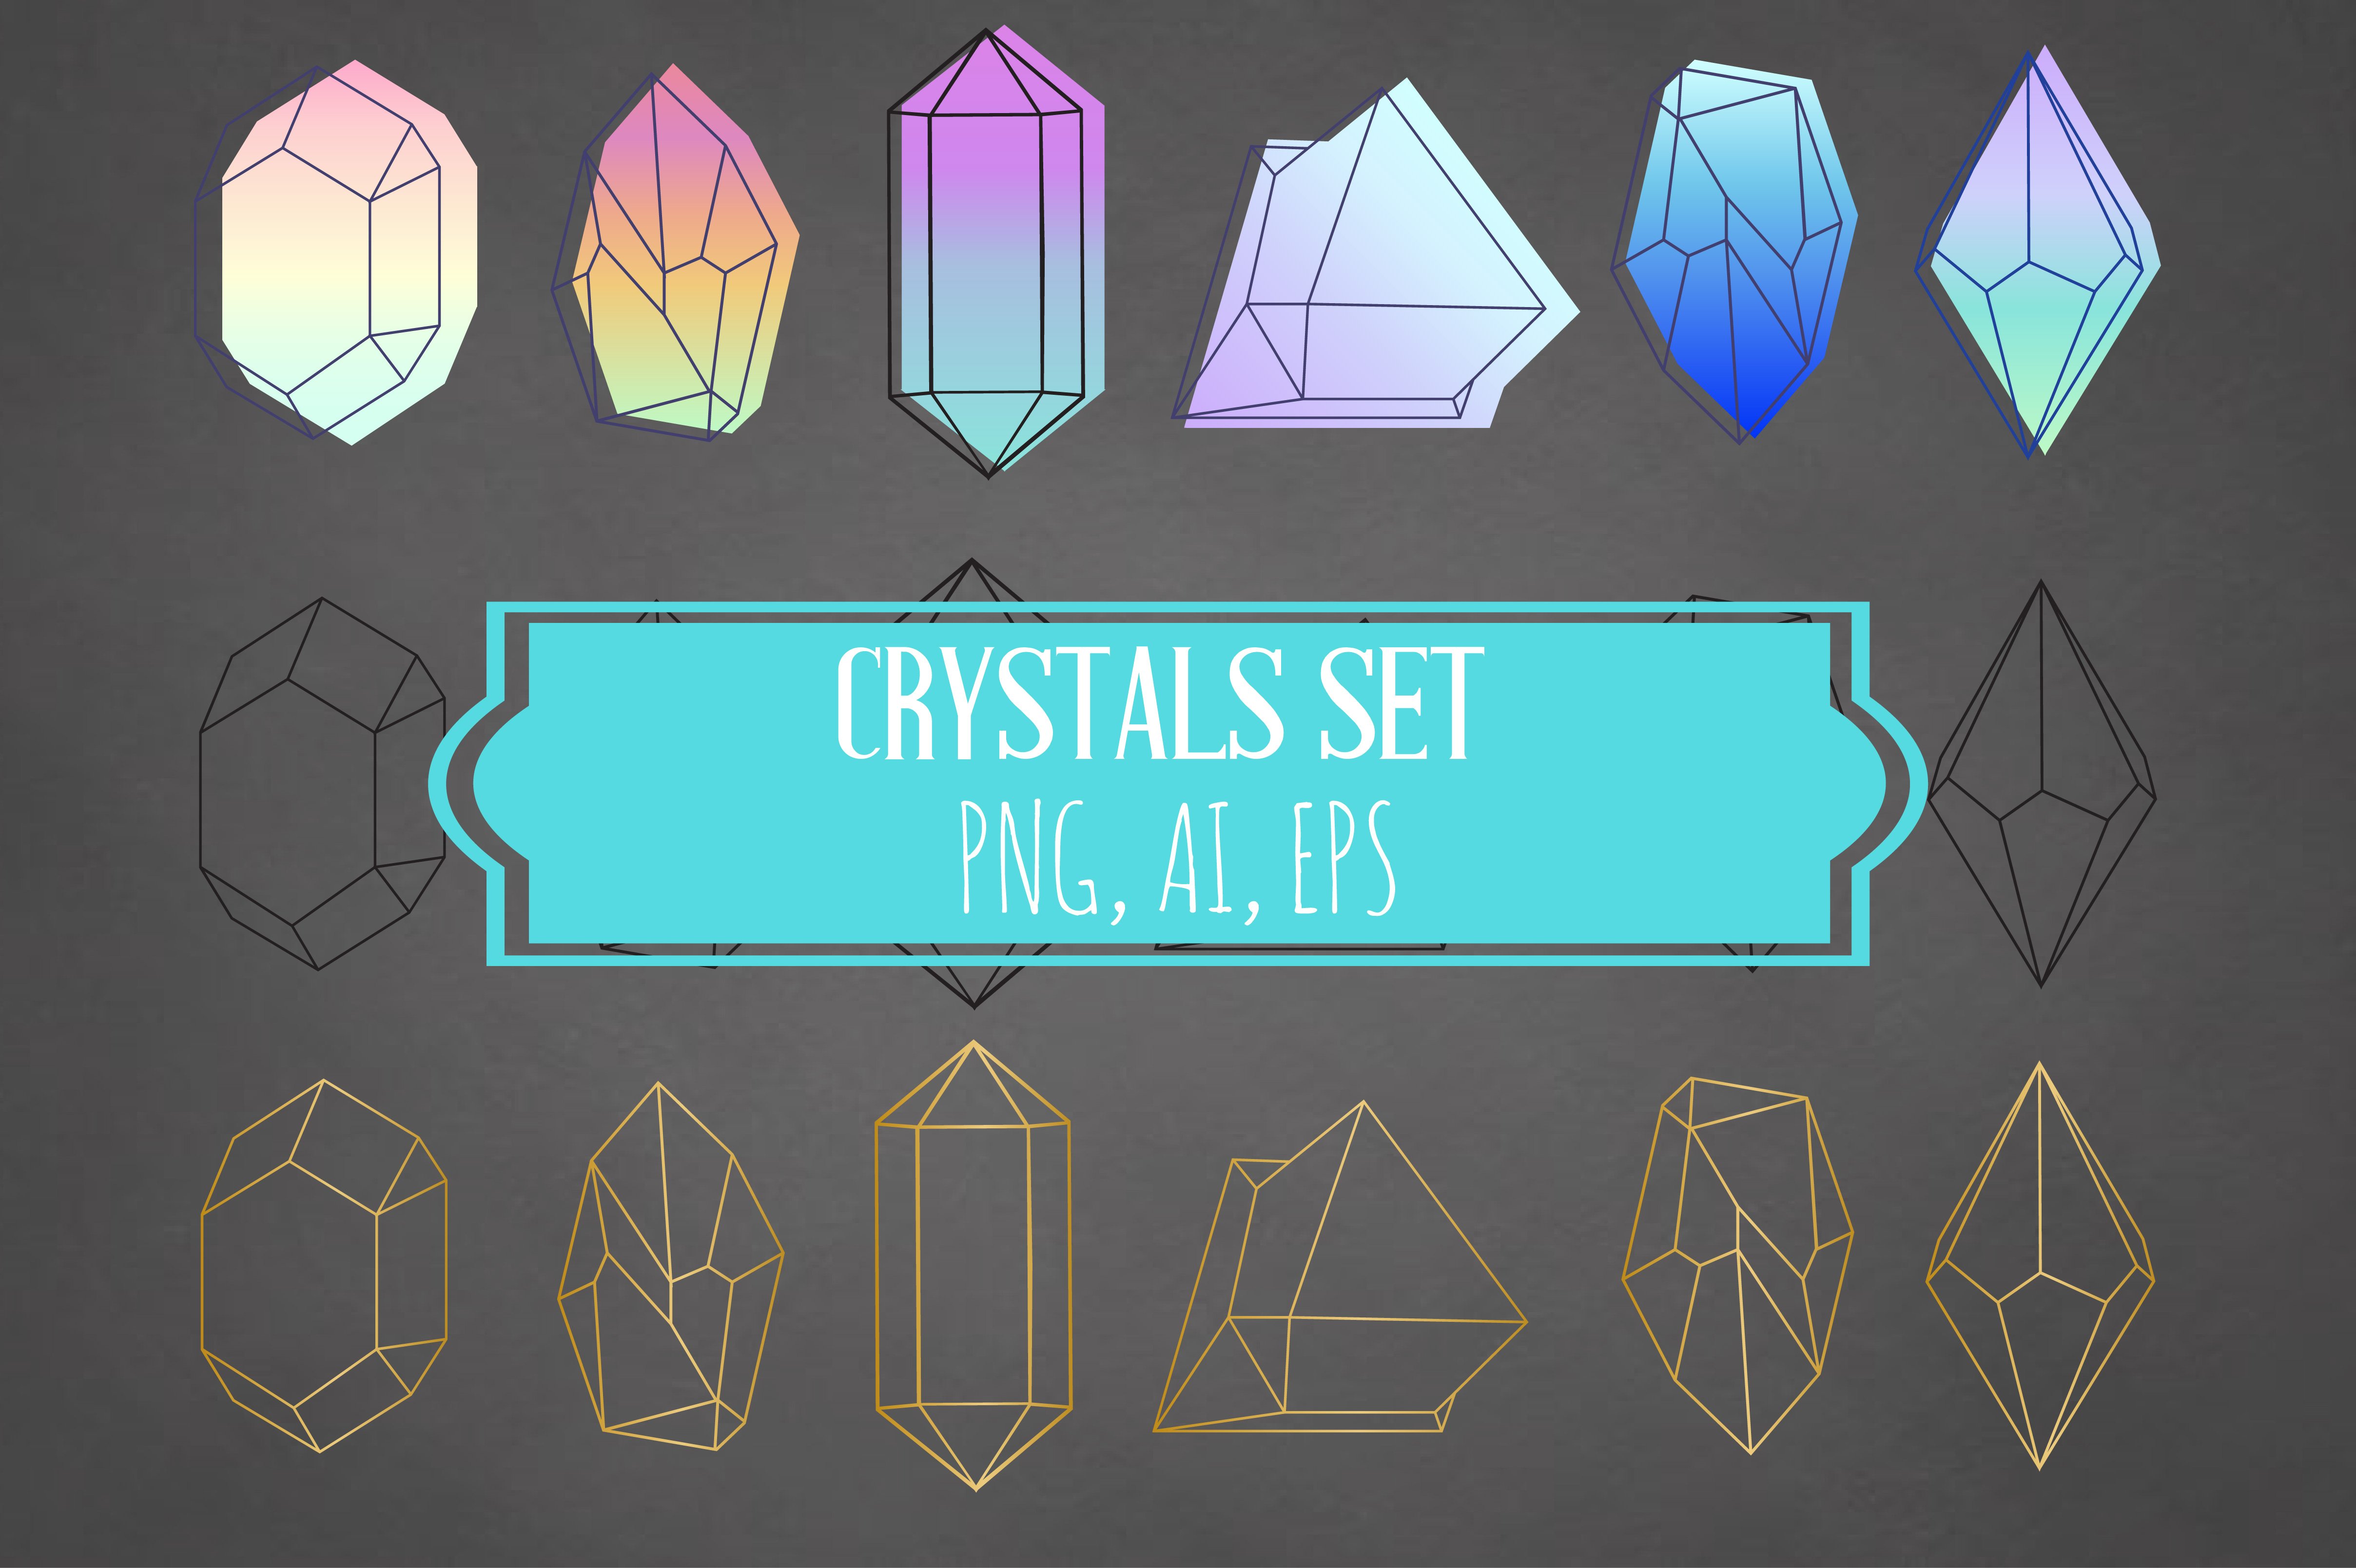 Crystals Set Neon Gold Black cover image.